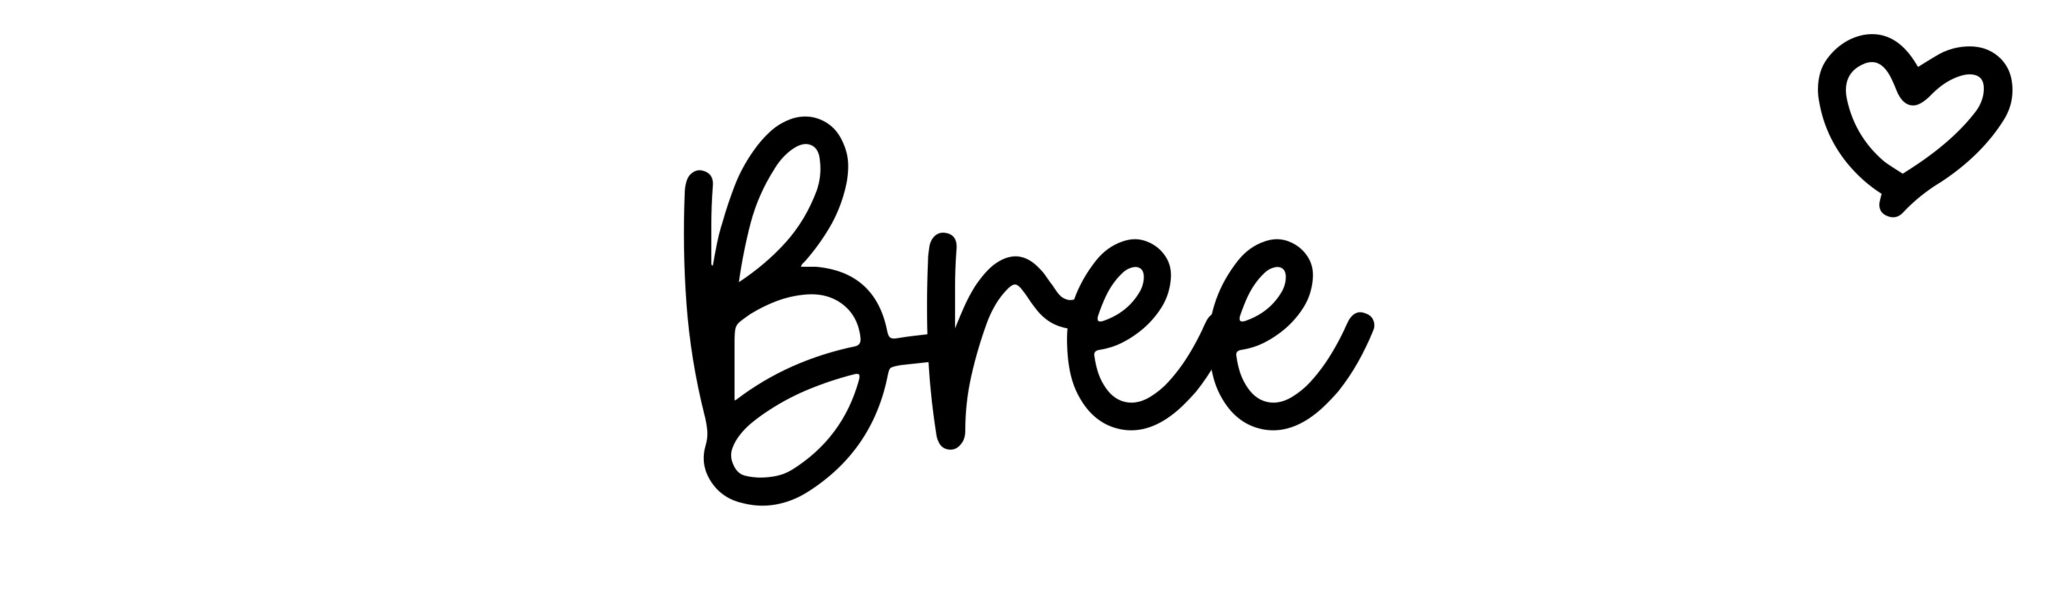 Bree - Name meaning, origin, variations and more